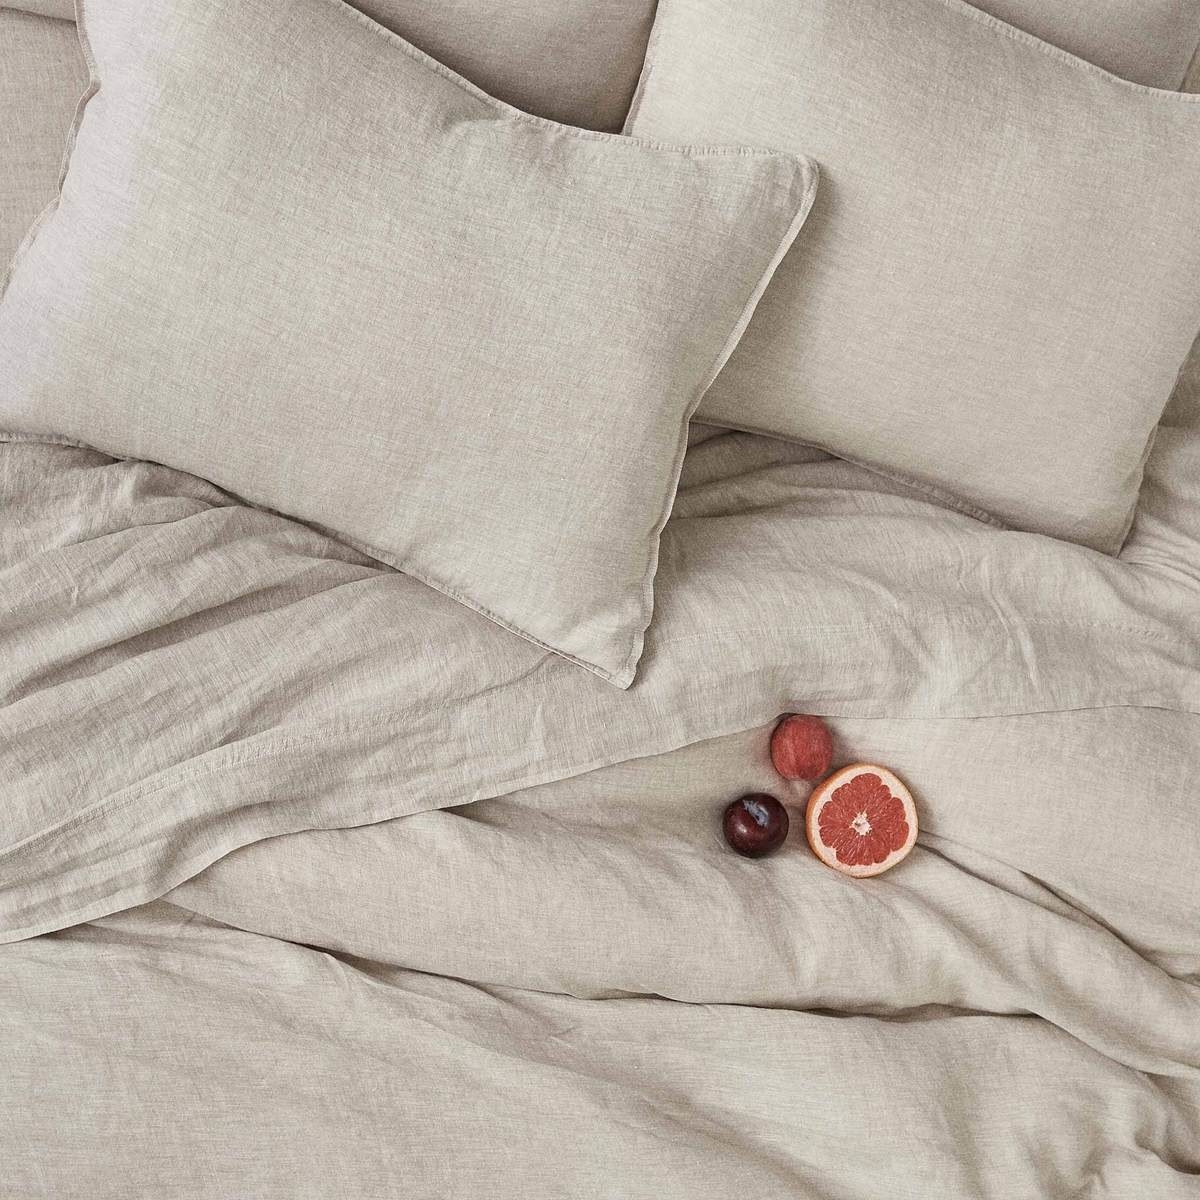 the linen sheets on a bed with fruit on the comforter 